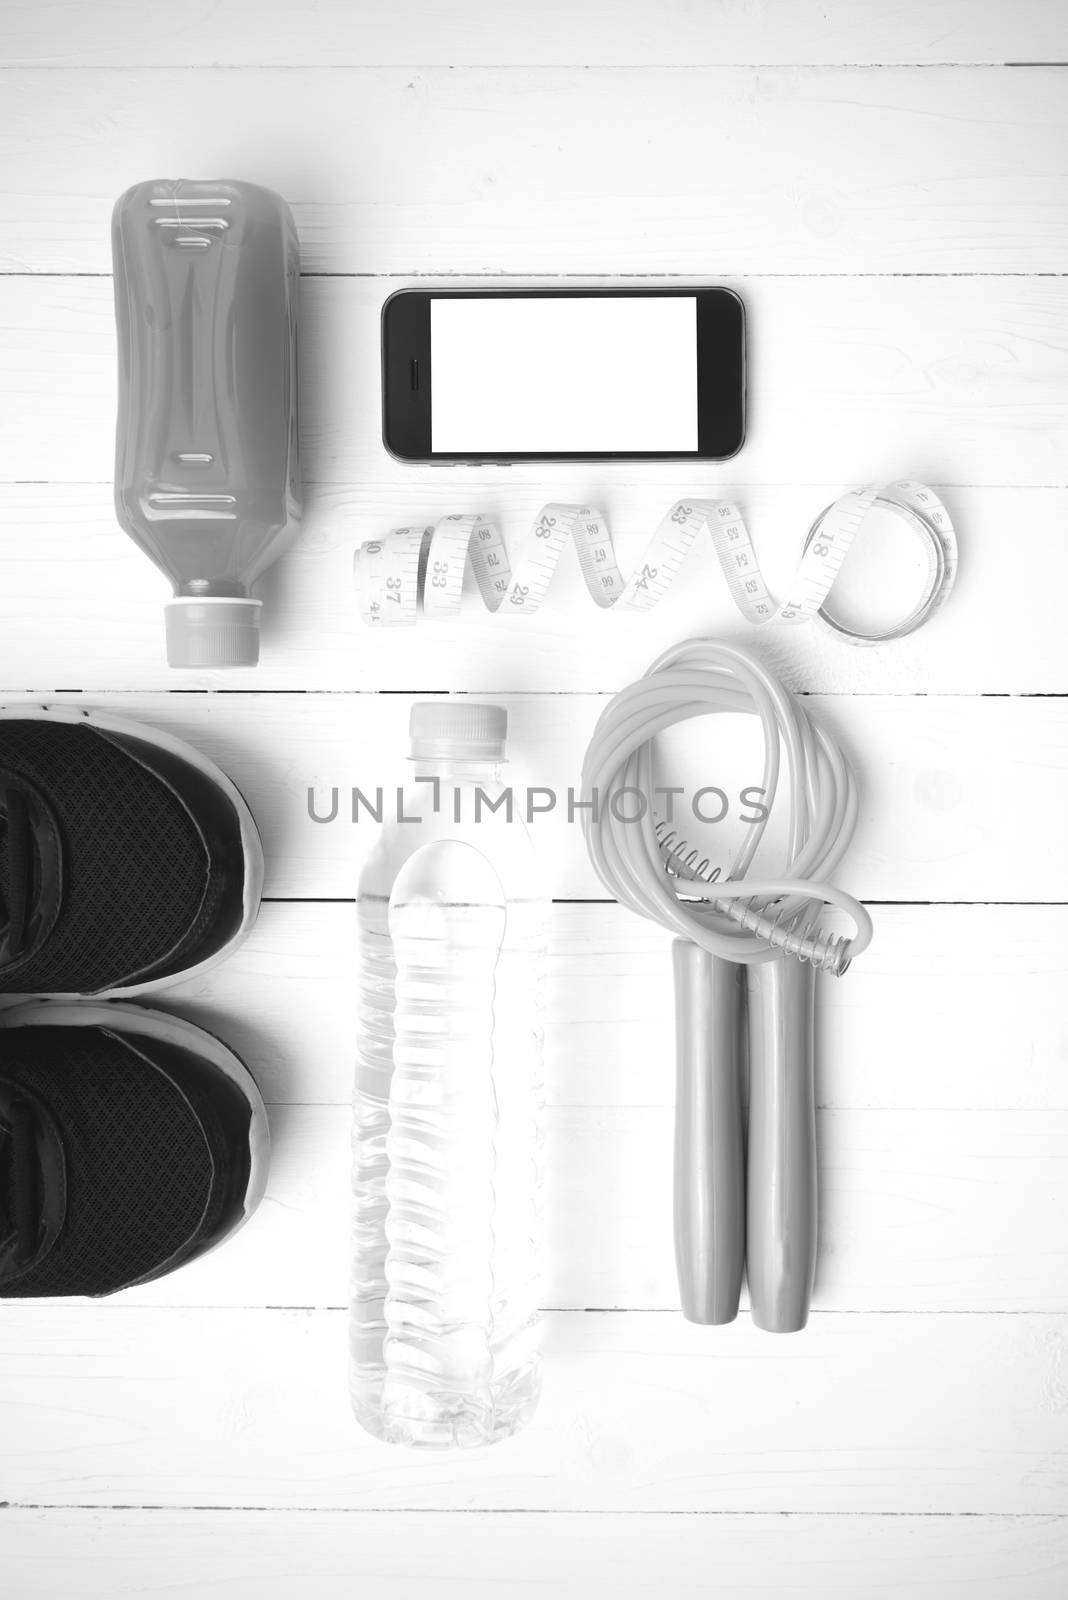 fitness equipment:running shoes,phone,measuring tape,water,juice and jumpong rope on white wood background black and white color